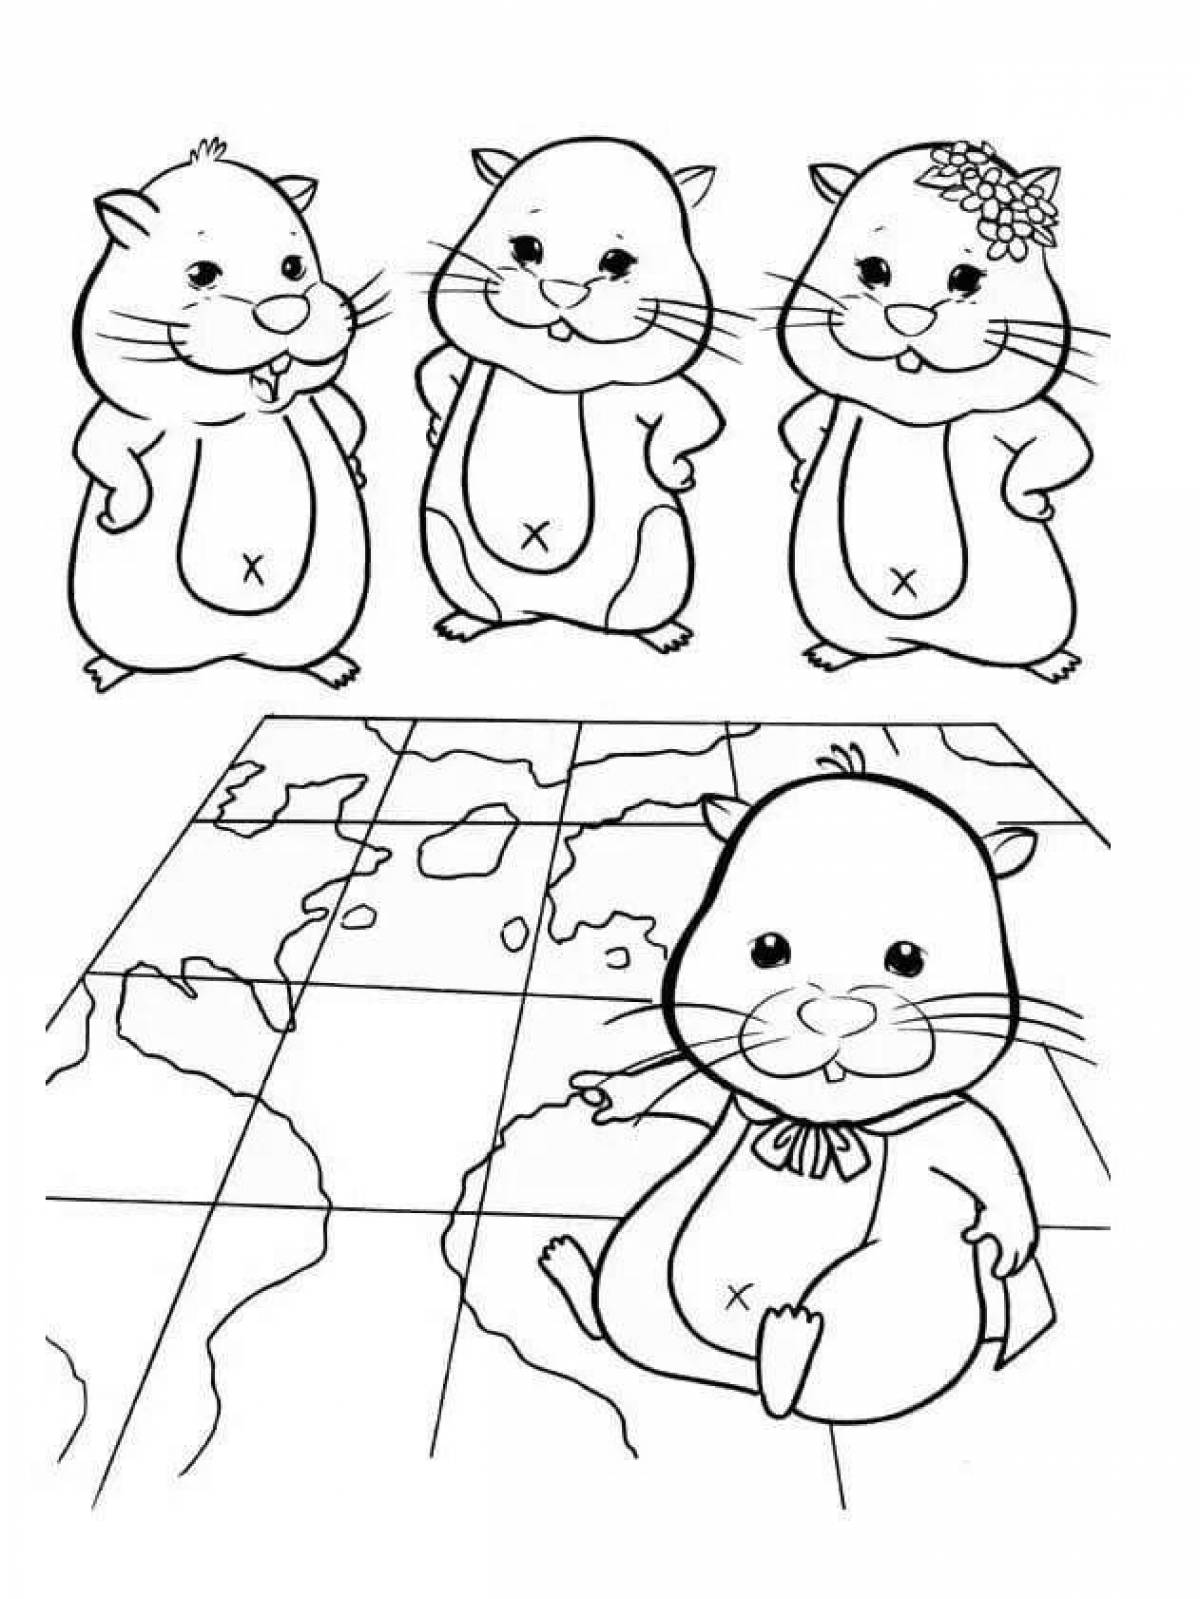 Tempting coloring pages for hamsters